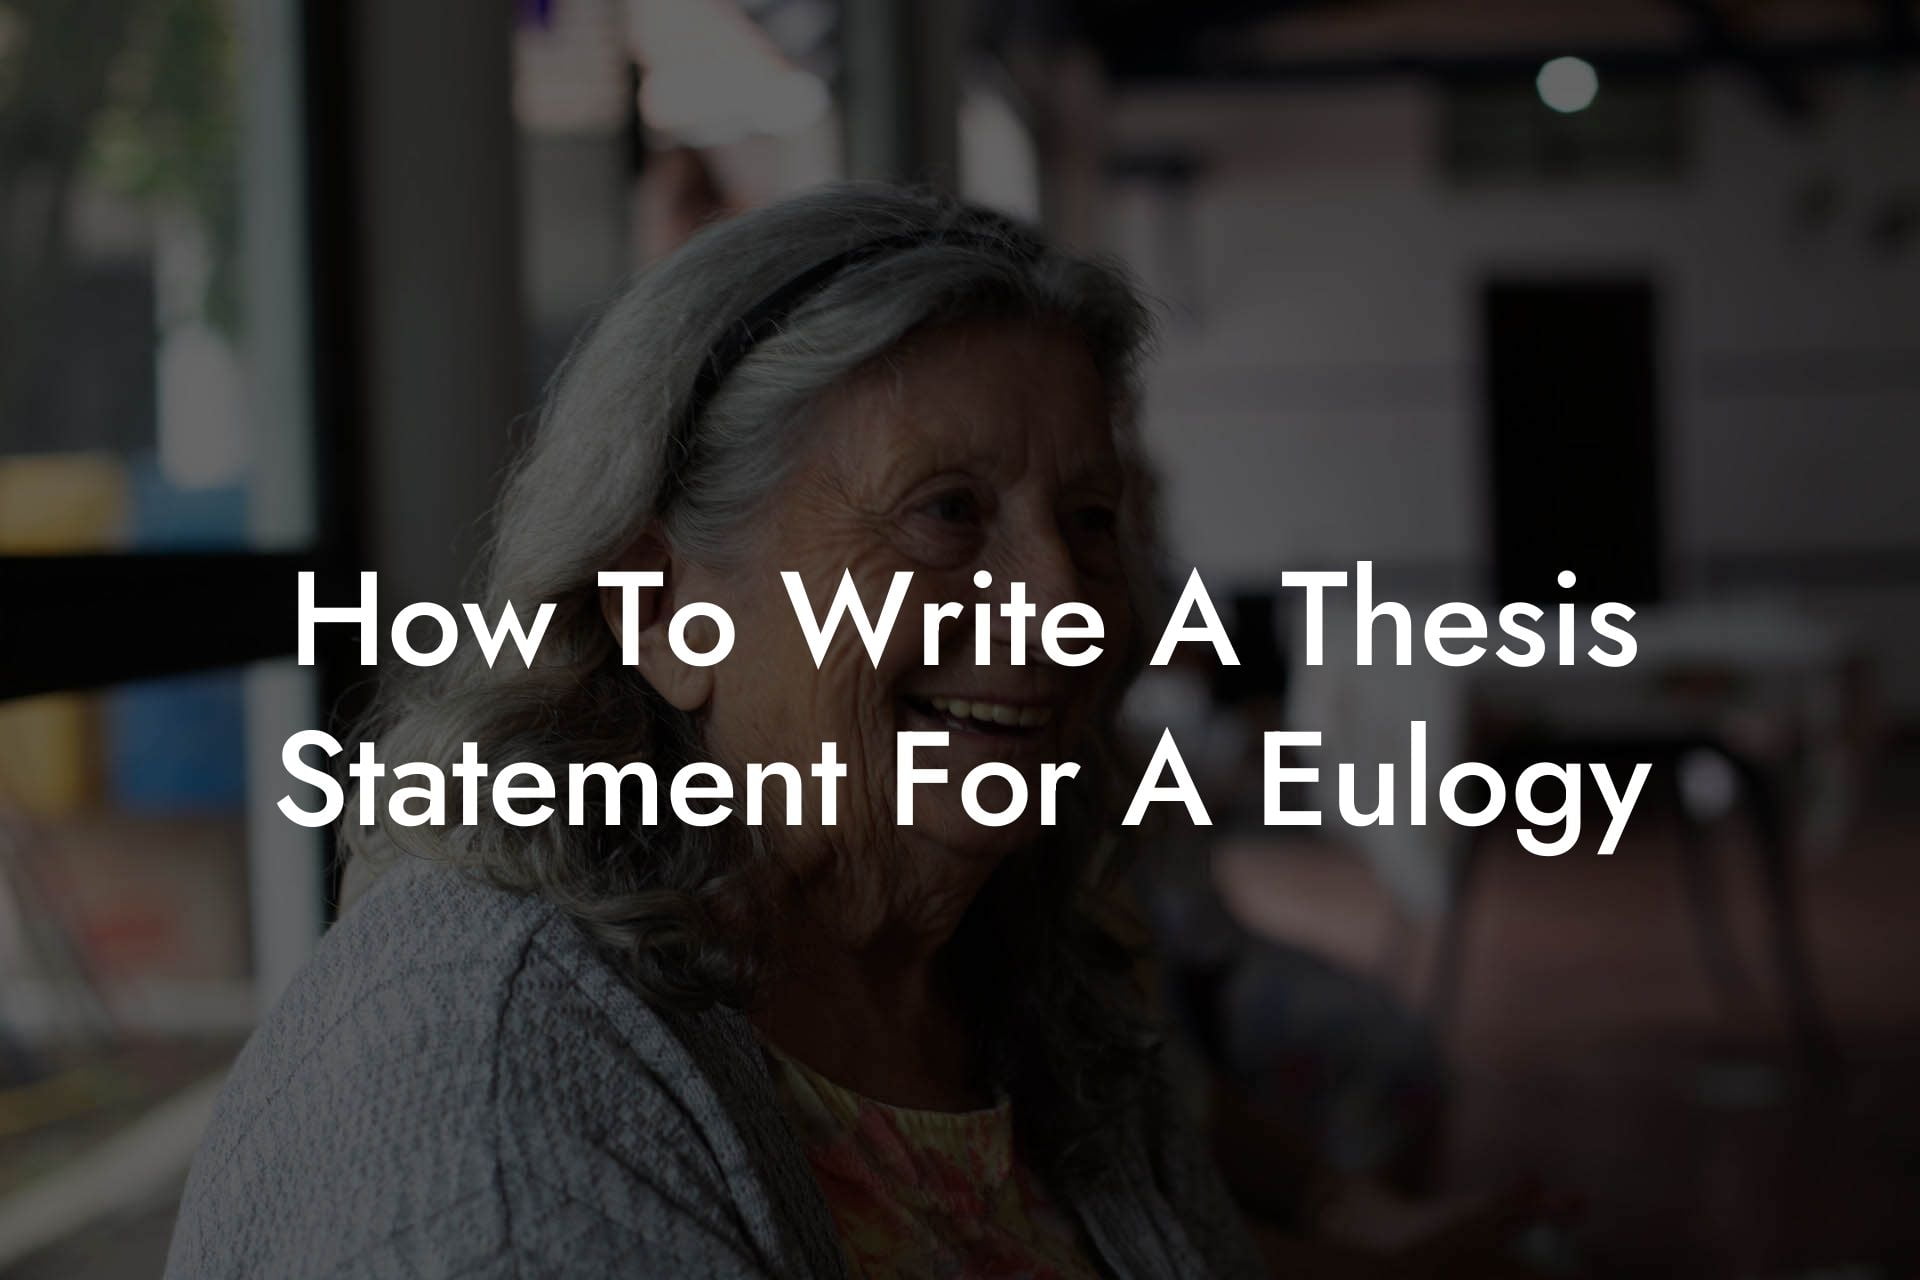 How To Write A Thesis Statement For A Eulogy